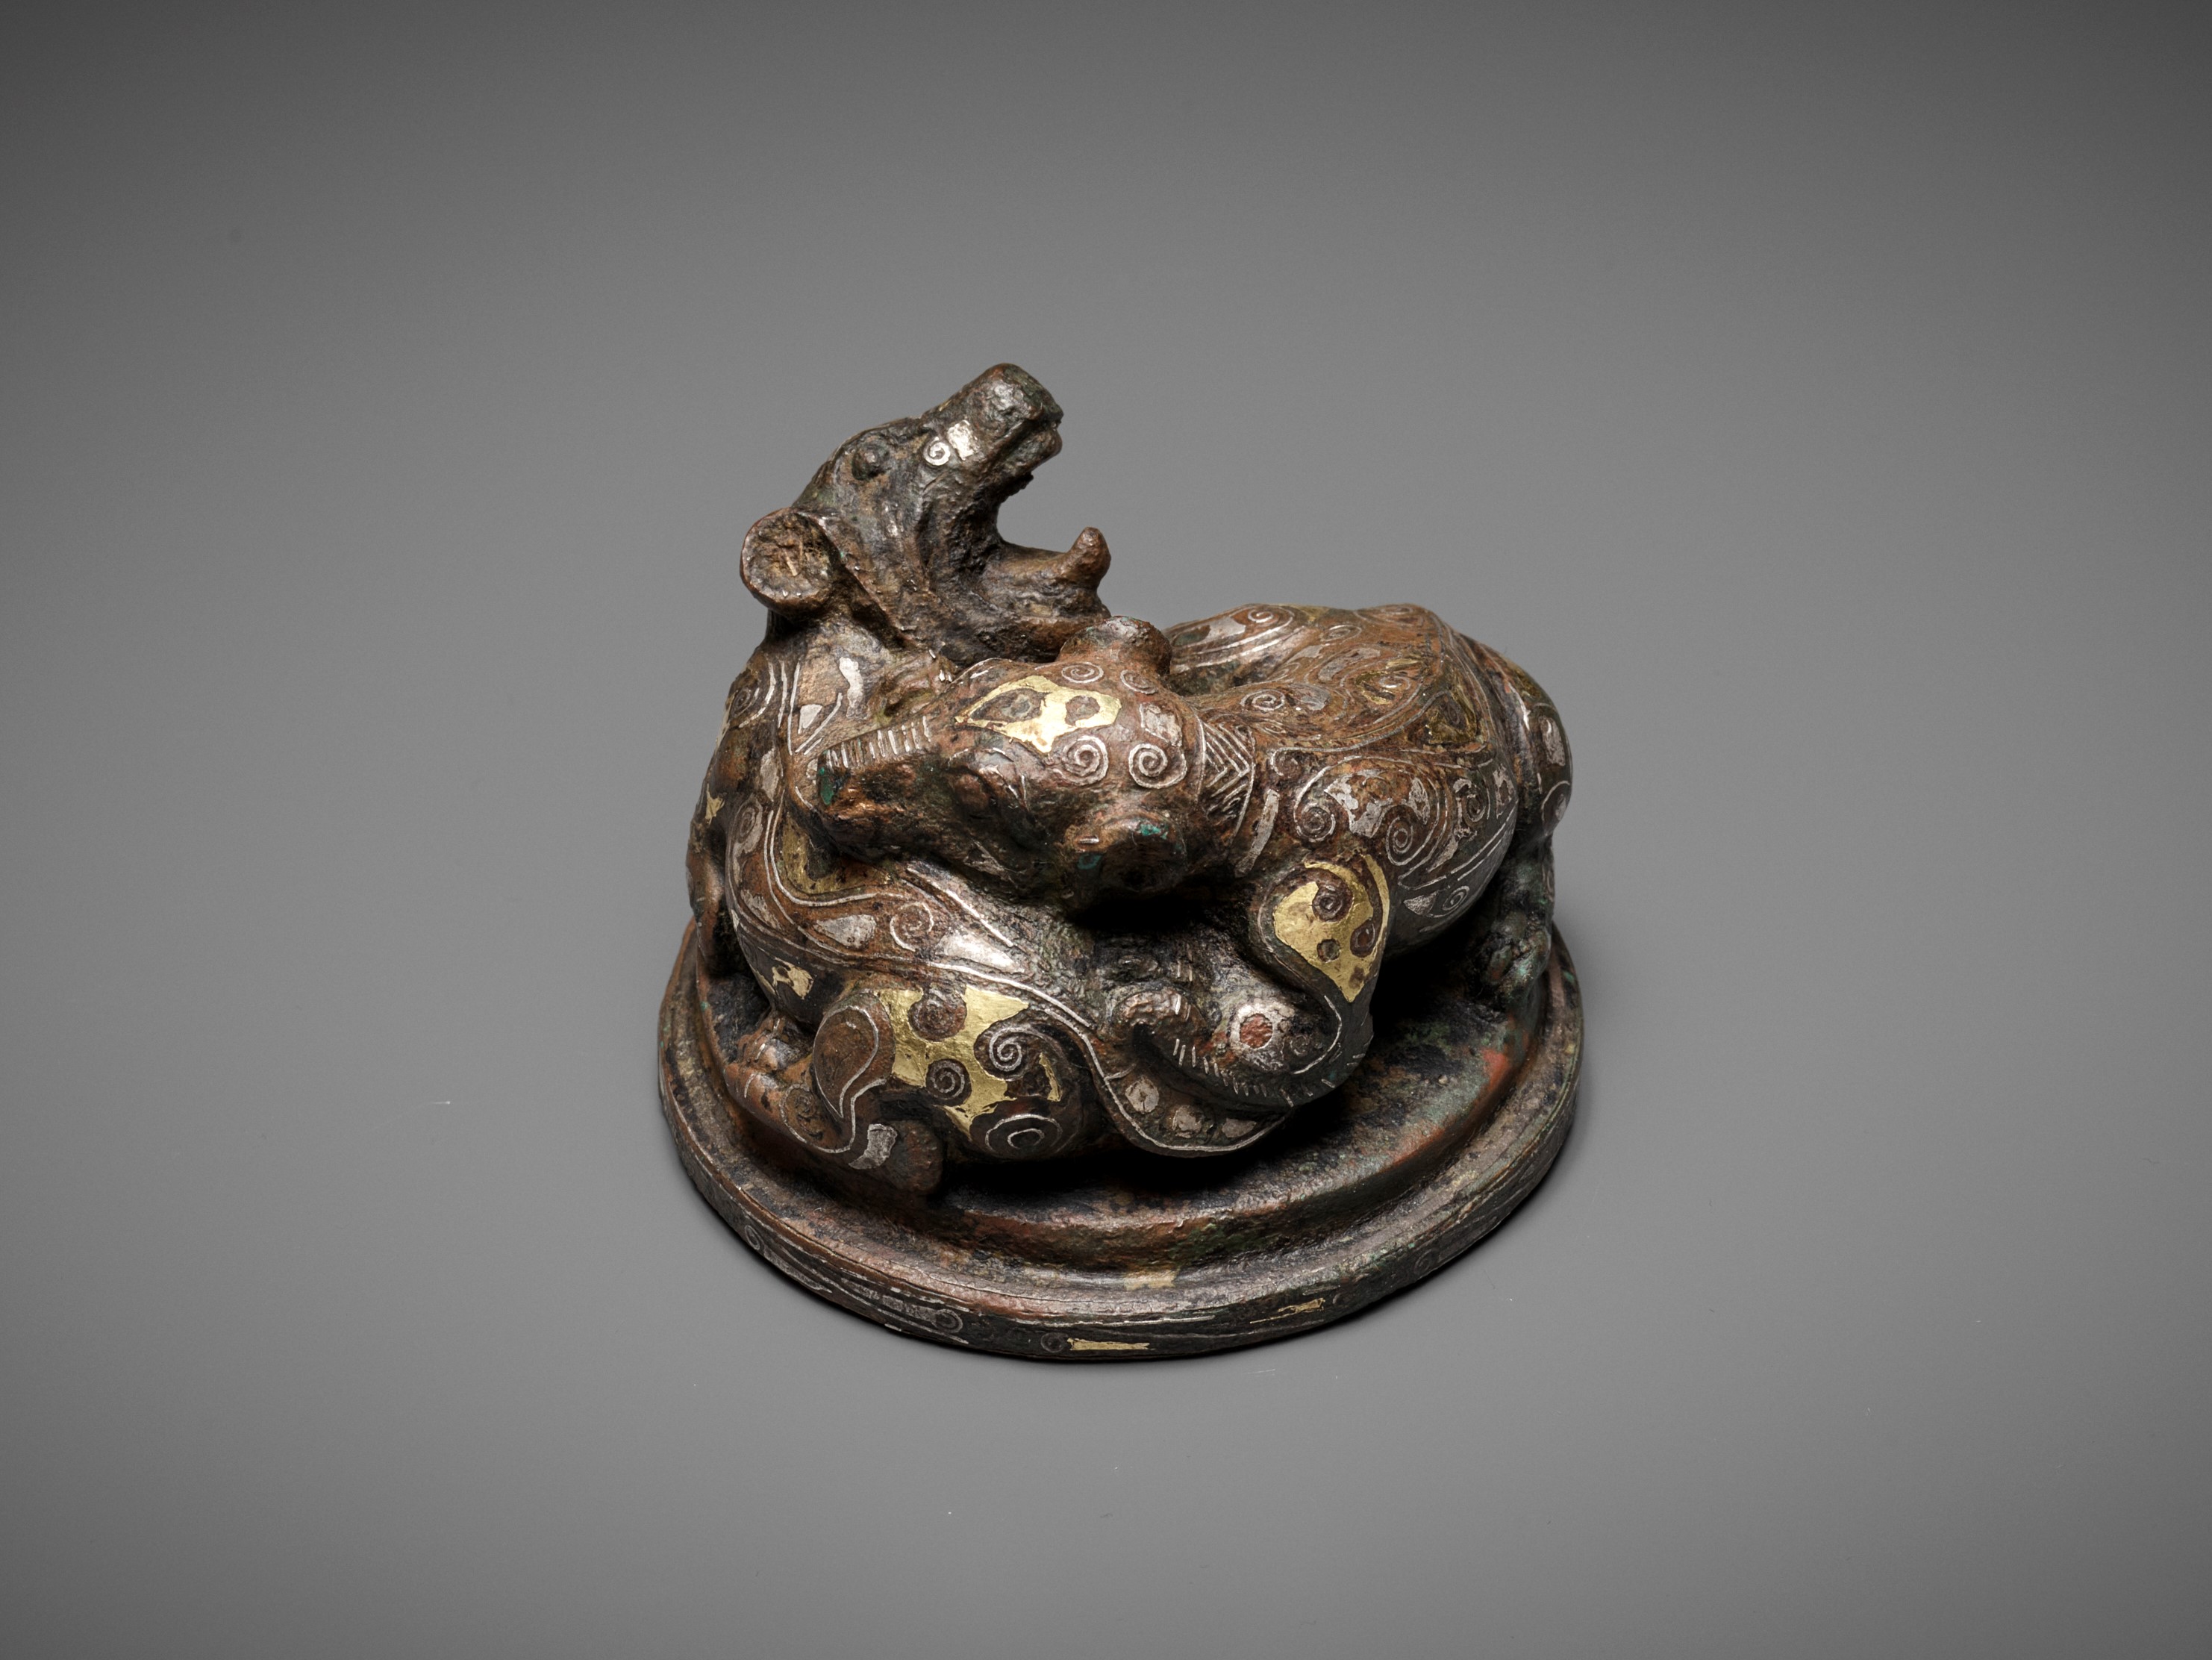 A GOLD AND SILVER-INLAID 'FIGHTING BEARS' BRONZE MAT WEIGHT, WARRING STATES TO HAN DYNASTY - Image 6 of 12